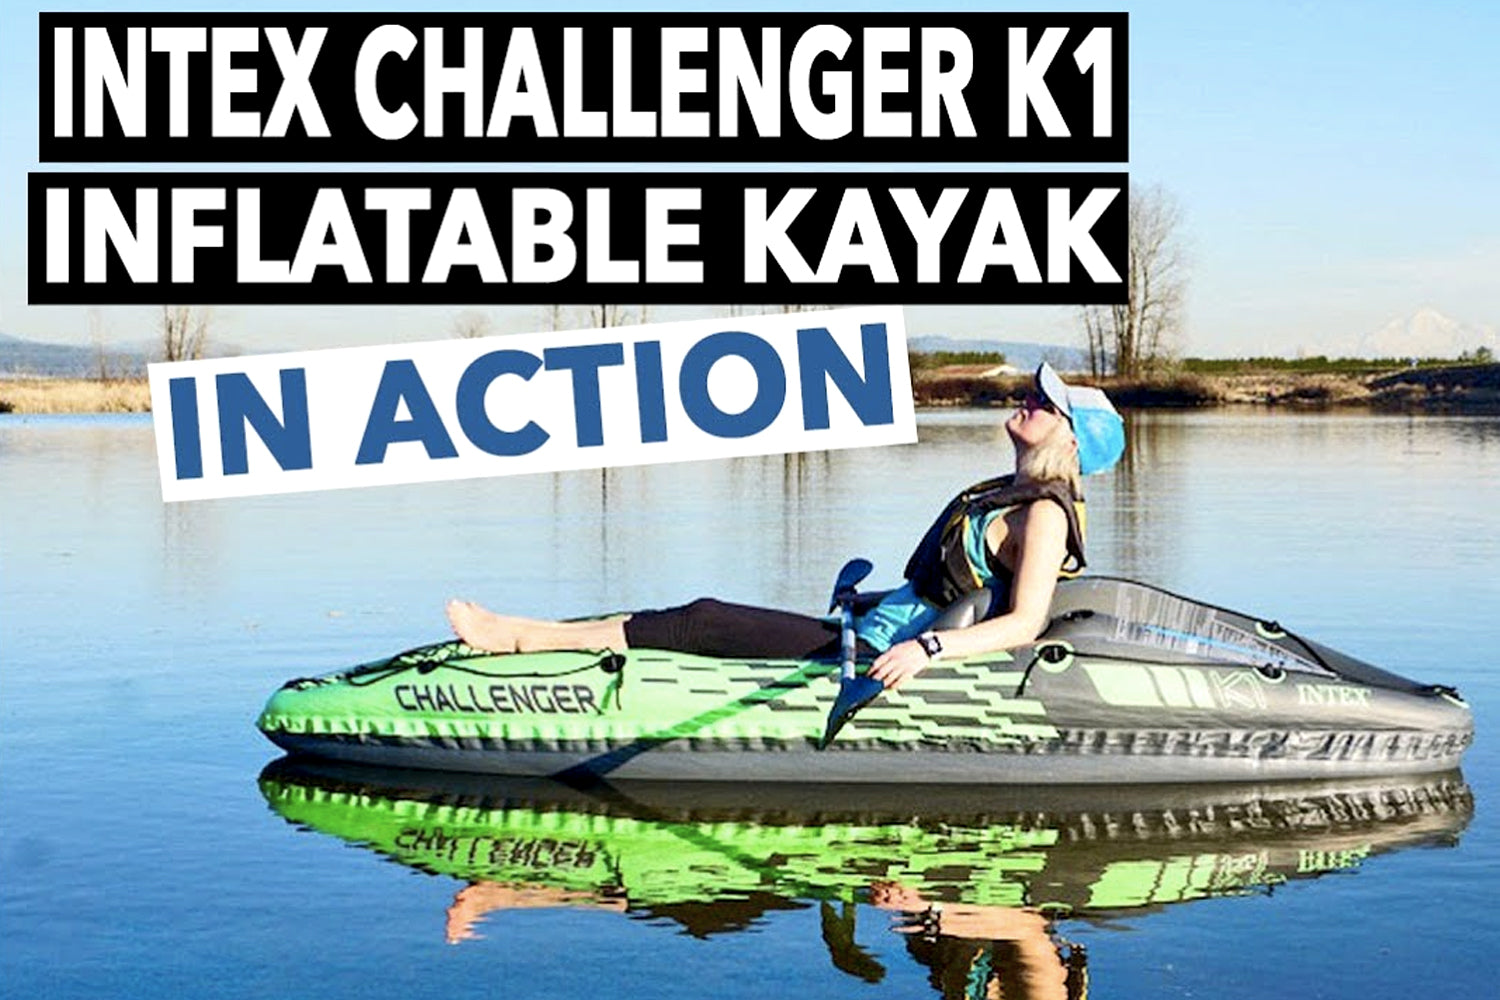 Kayak Inflatable Set 1-2 Person Blow Up Canoe with Aluminum Oars and Hand Pump Intex Challenger K1 Challenger K2 1 Person kayak 2 Person Kayak Blue Inflatable Kayak